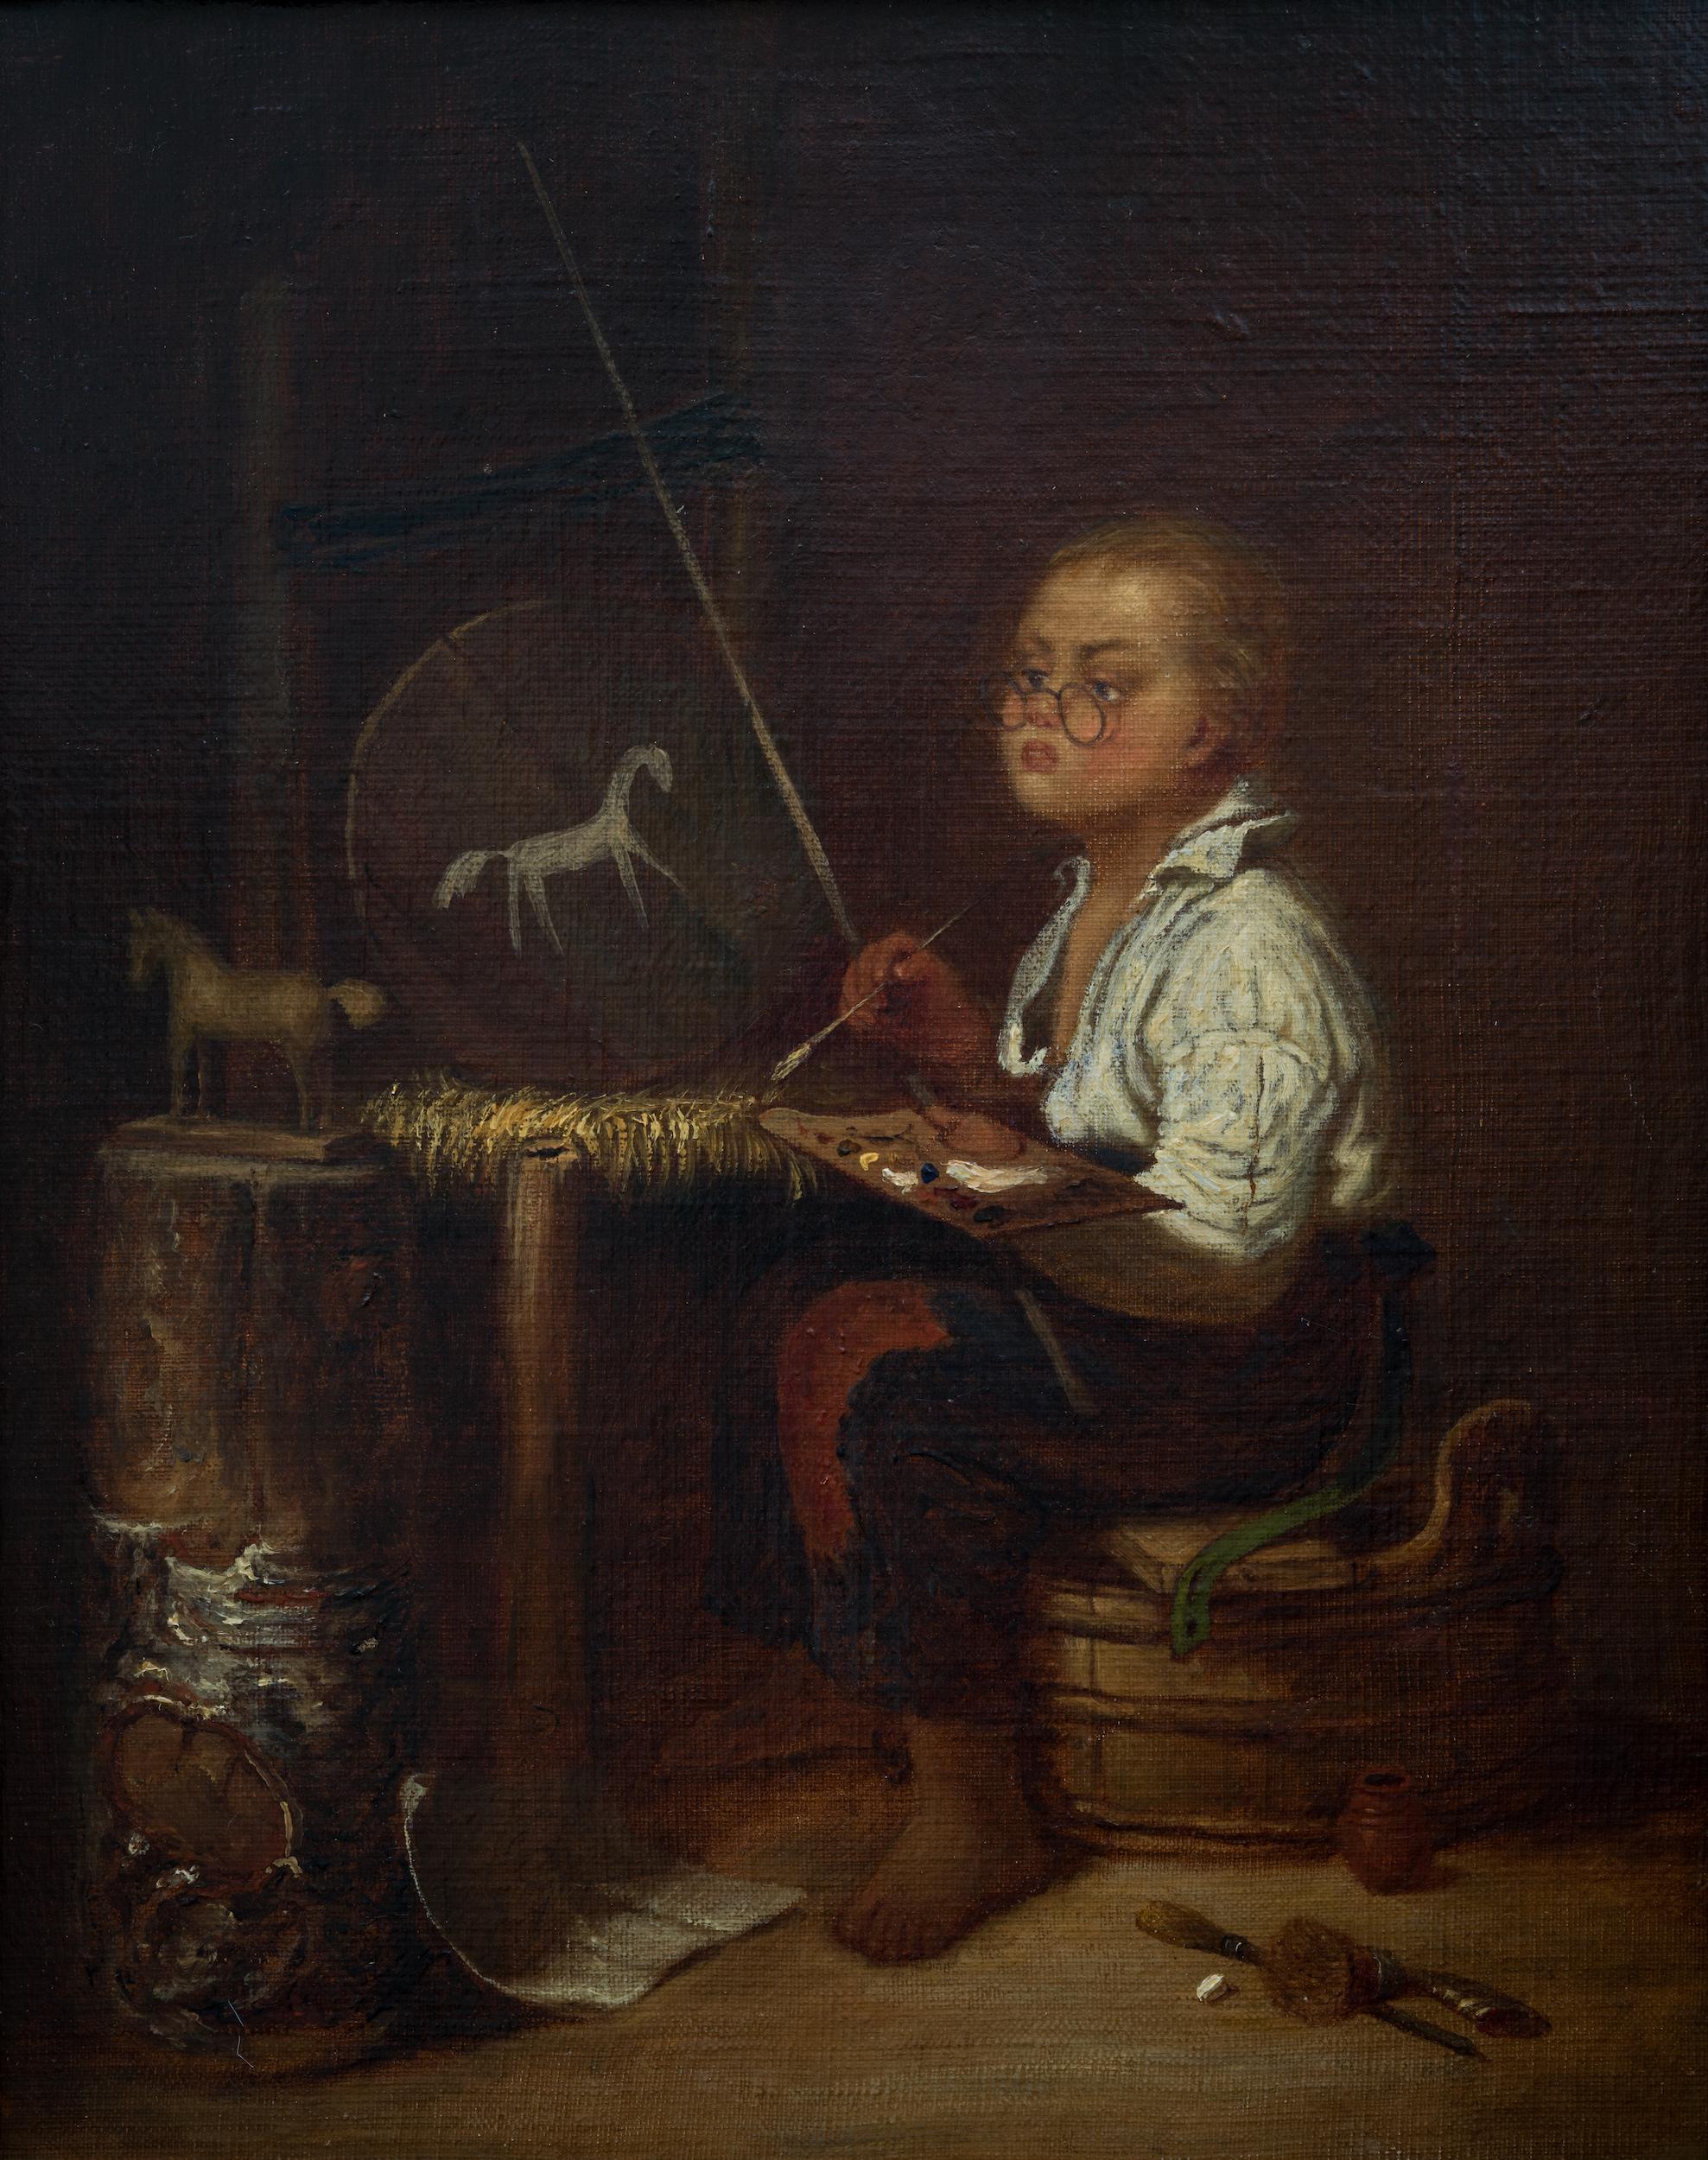 Oil Painting Called "The Young Artist" by Swedish Johan Christoffer Boklund